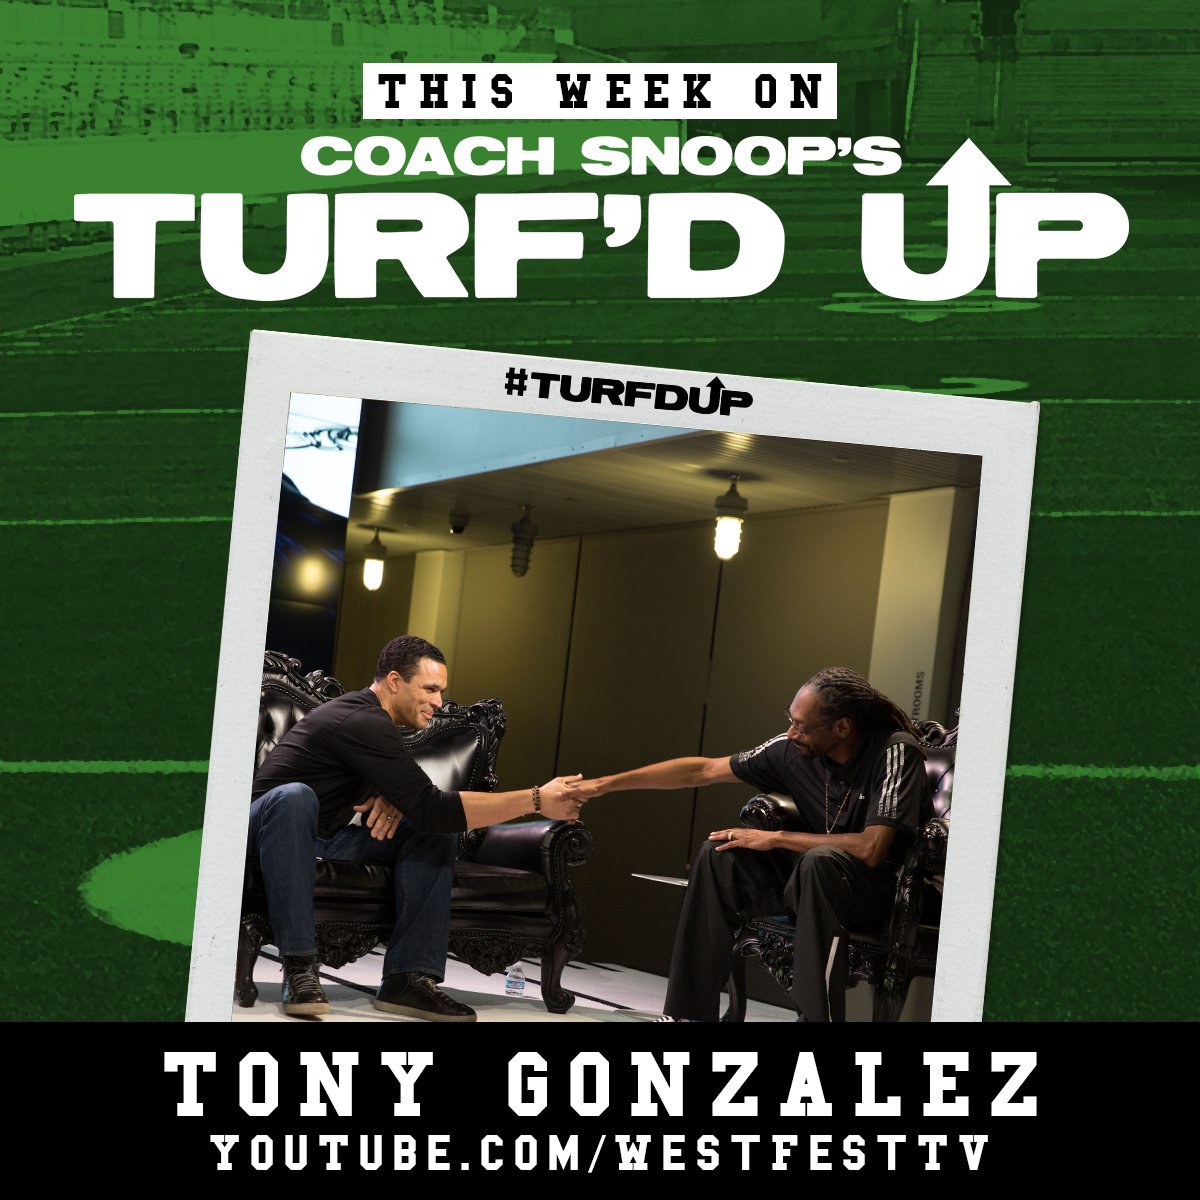 why @TonyGonzalez88 chose to play 4 cal ? find out tomorrow #TurfdUp https://t.co/LS7few7Cmf  @adidasfballus ???????????? https://t.co/fM2Sljuavo